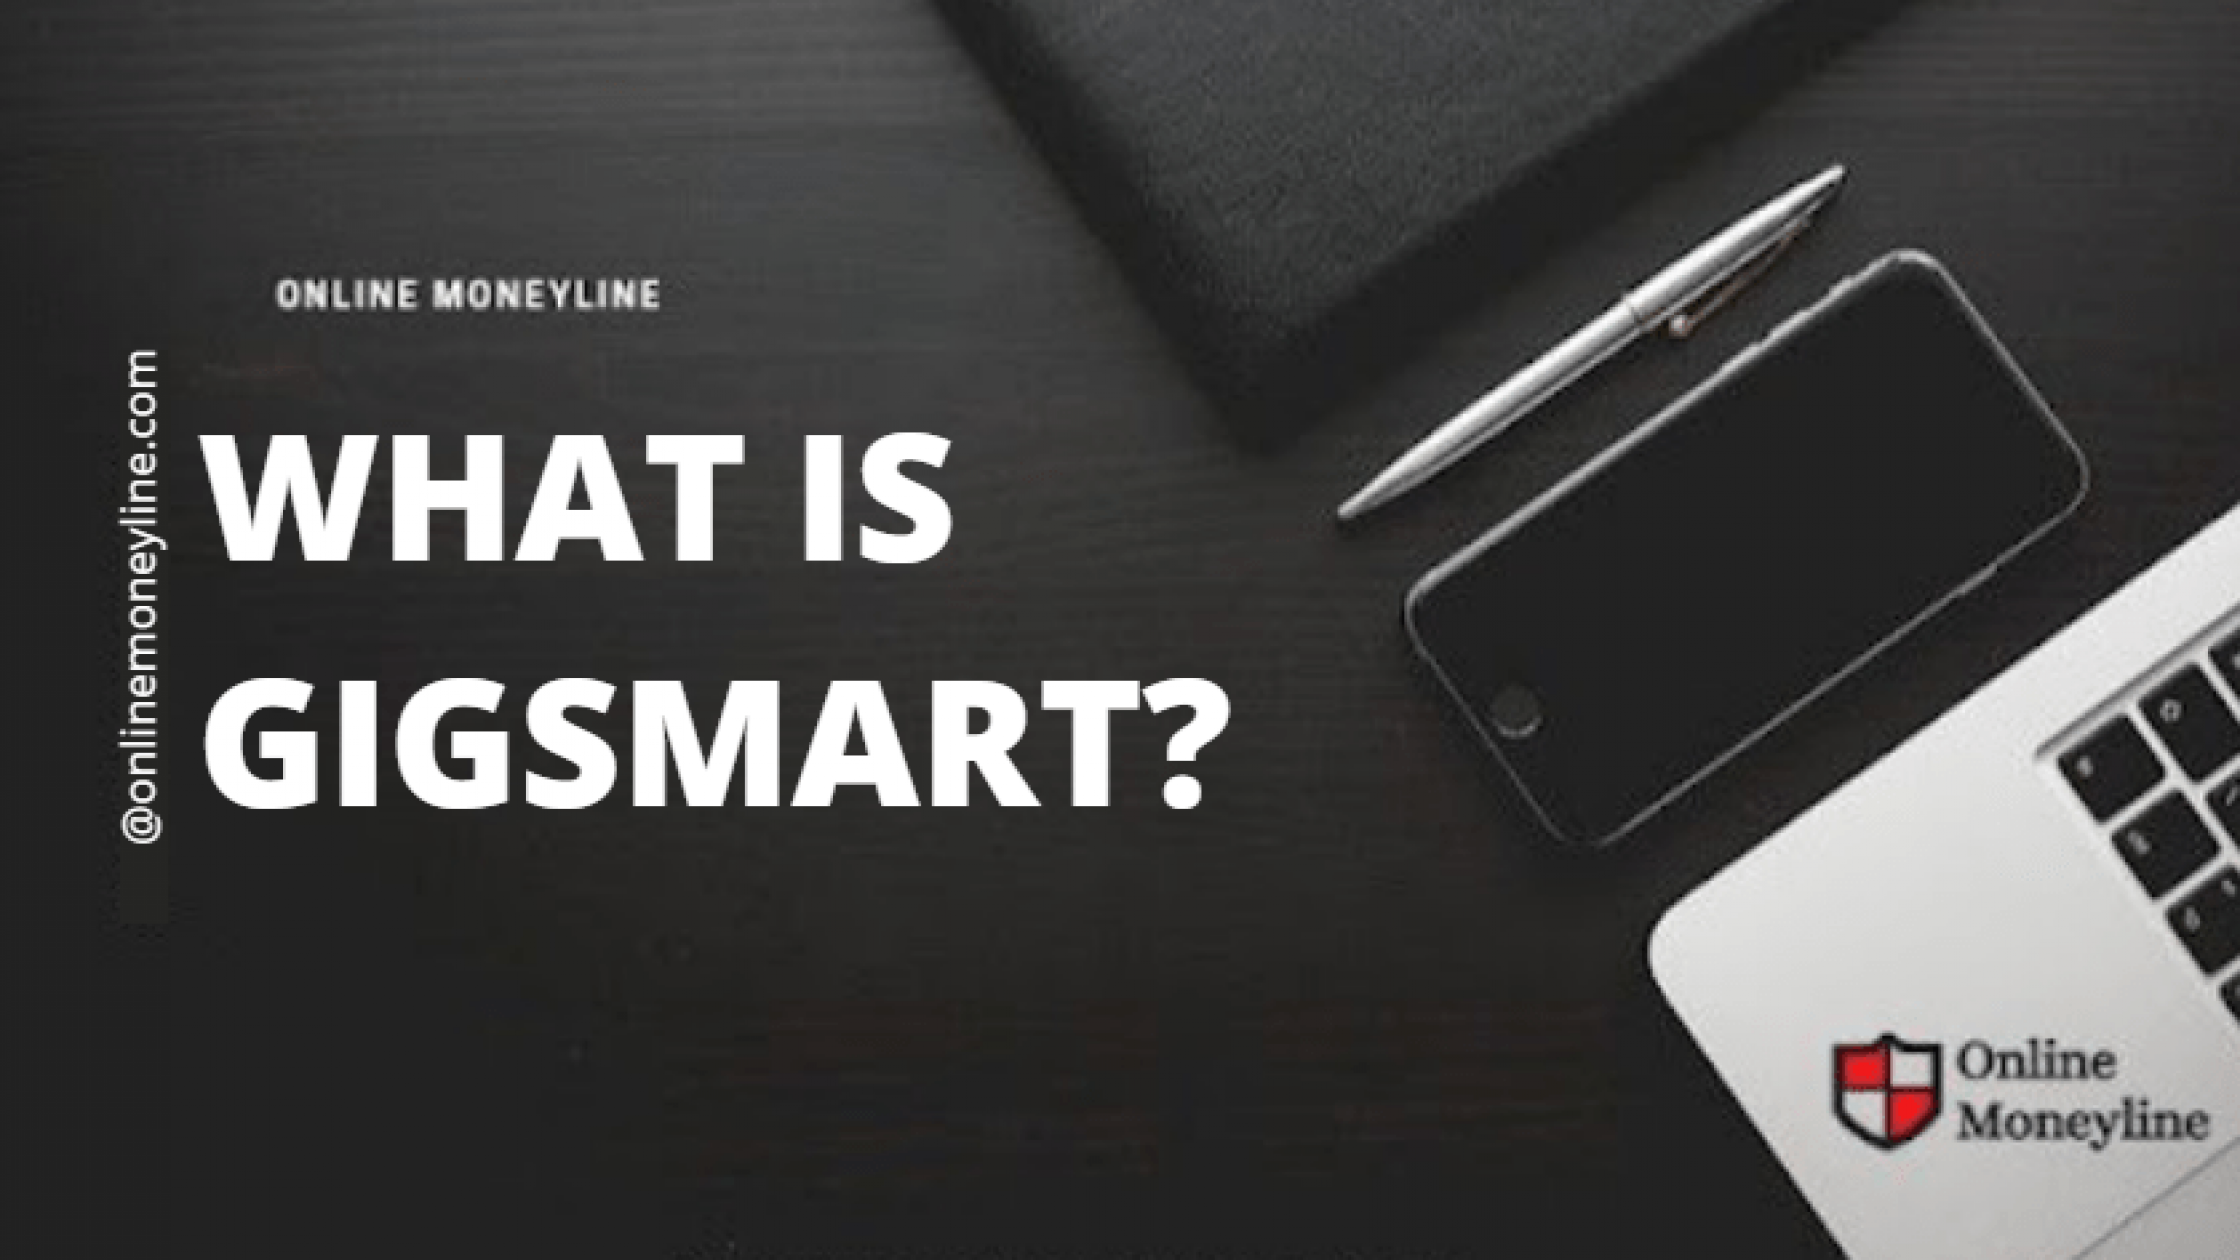 What Is Gigsmart?